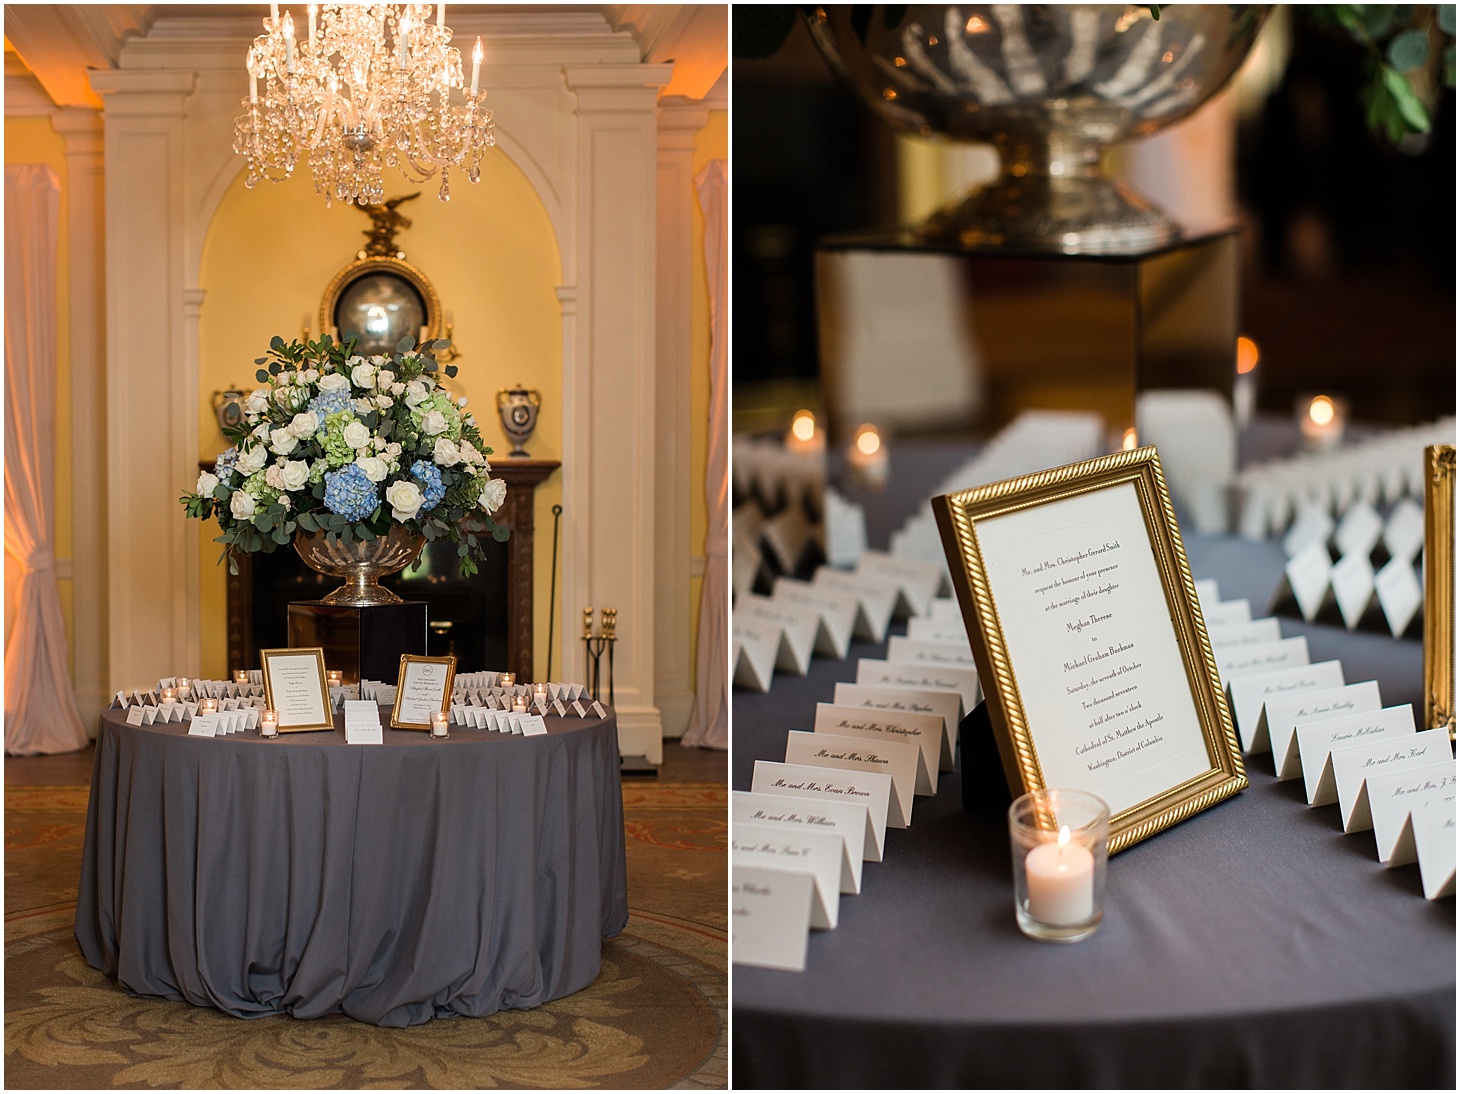 Wedding Reception at Columbia Country Club | Wedding Ceremony at Cathedral of St. Matthew the Apostle | Classy October Wedding in Washington, D.C. | Sarah Bradshaw Photography